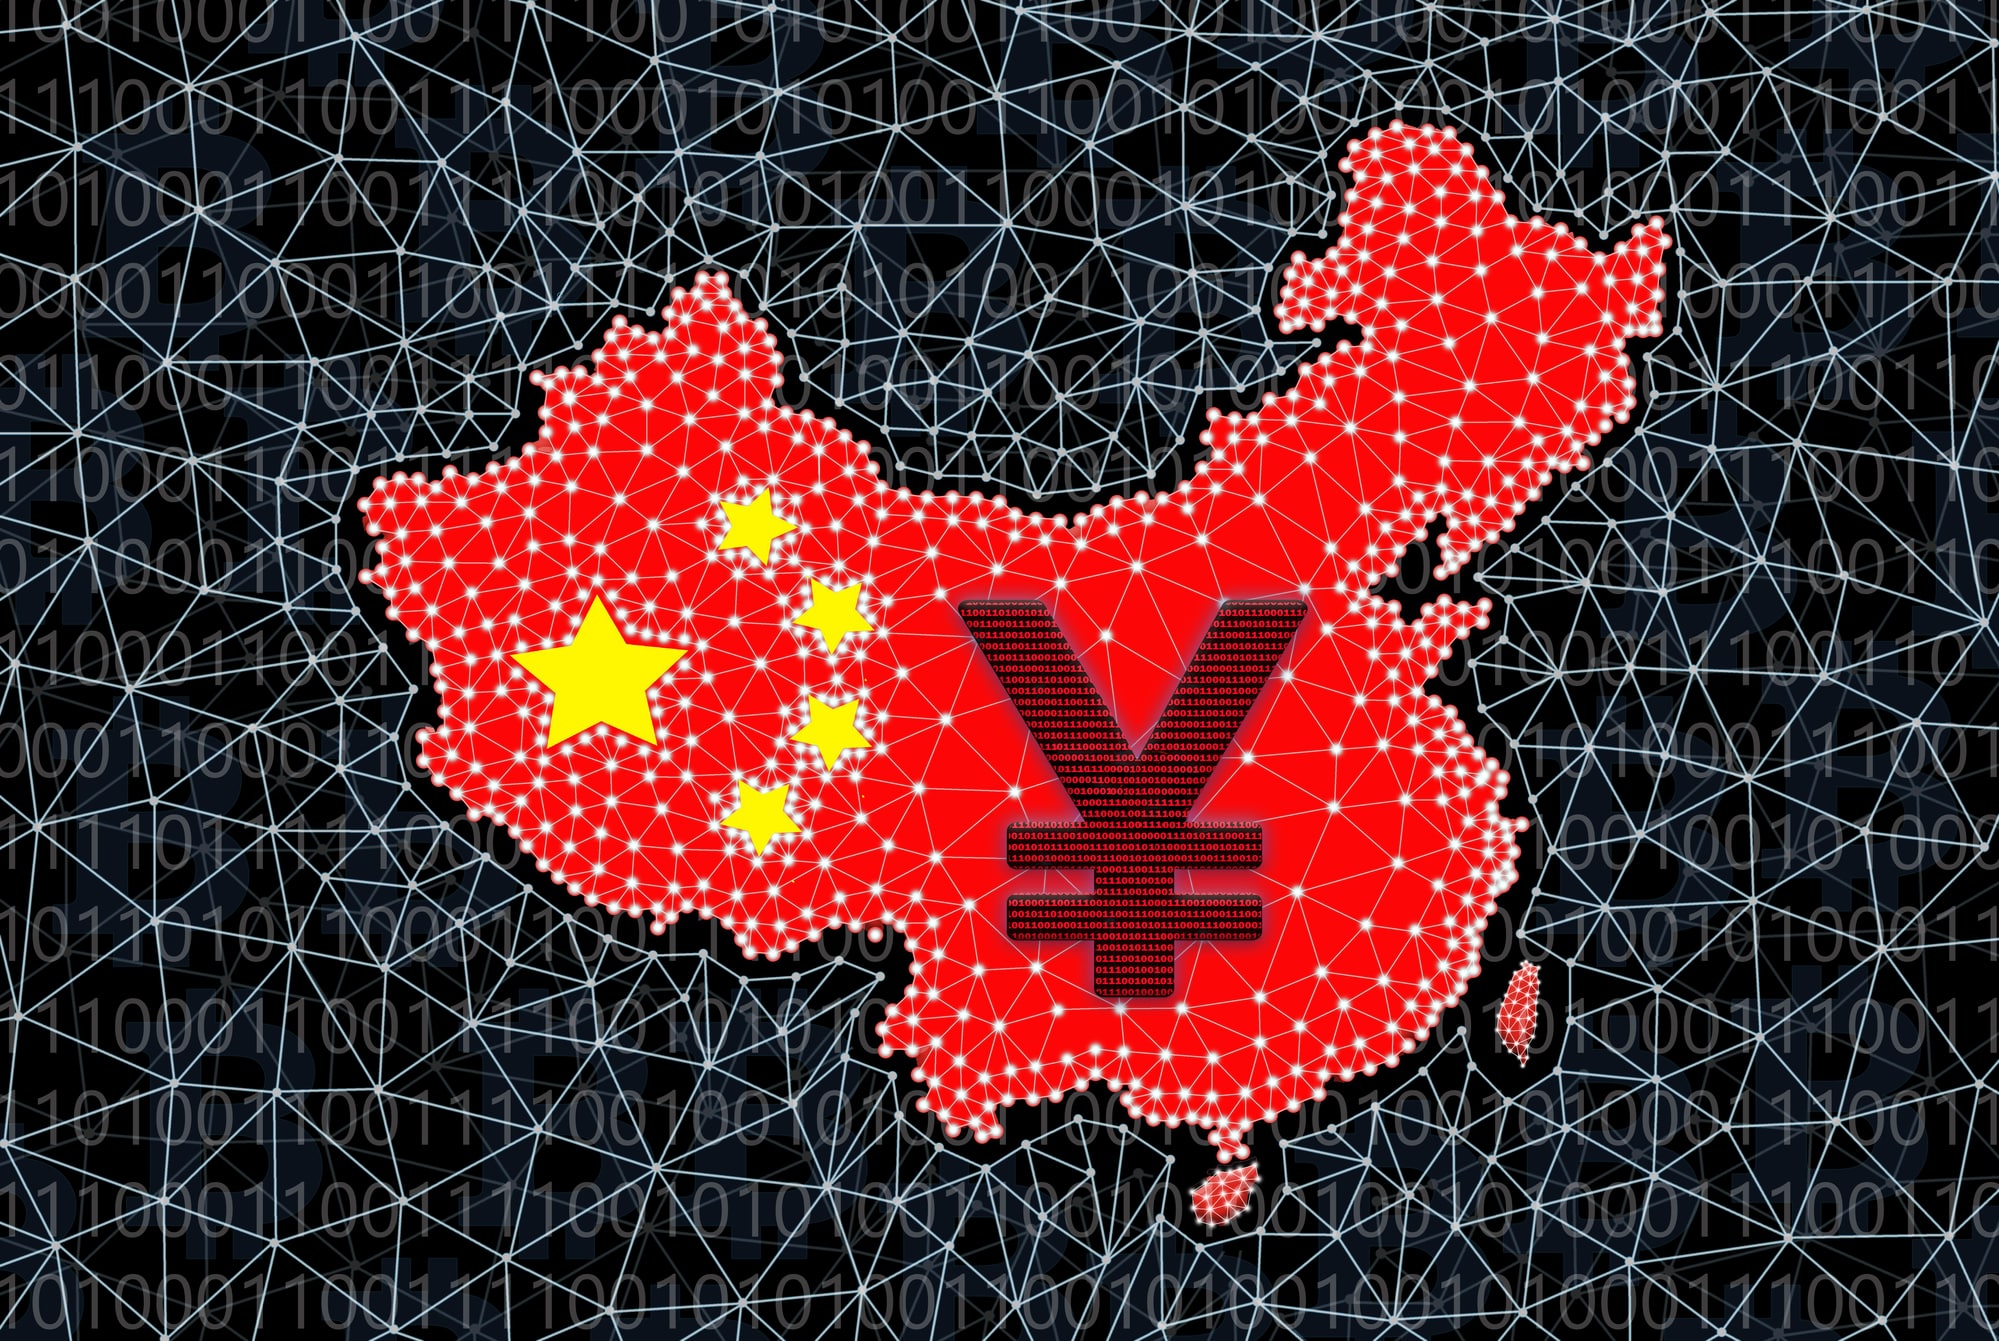 Digital yuan: Will China get the first-mover advantage with the wide adoption of digital currency?